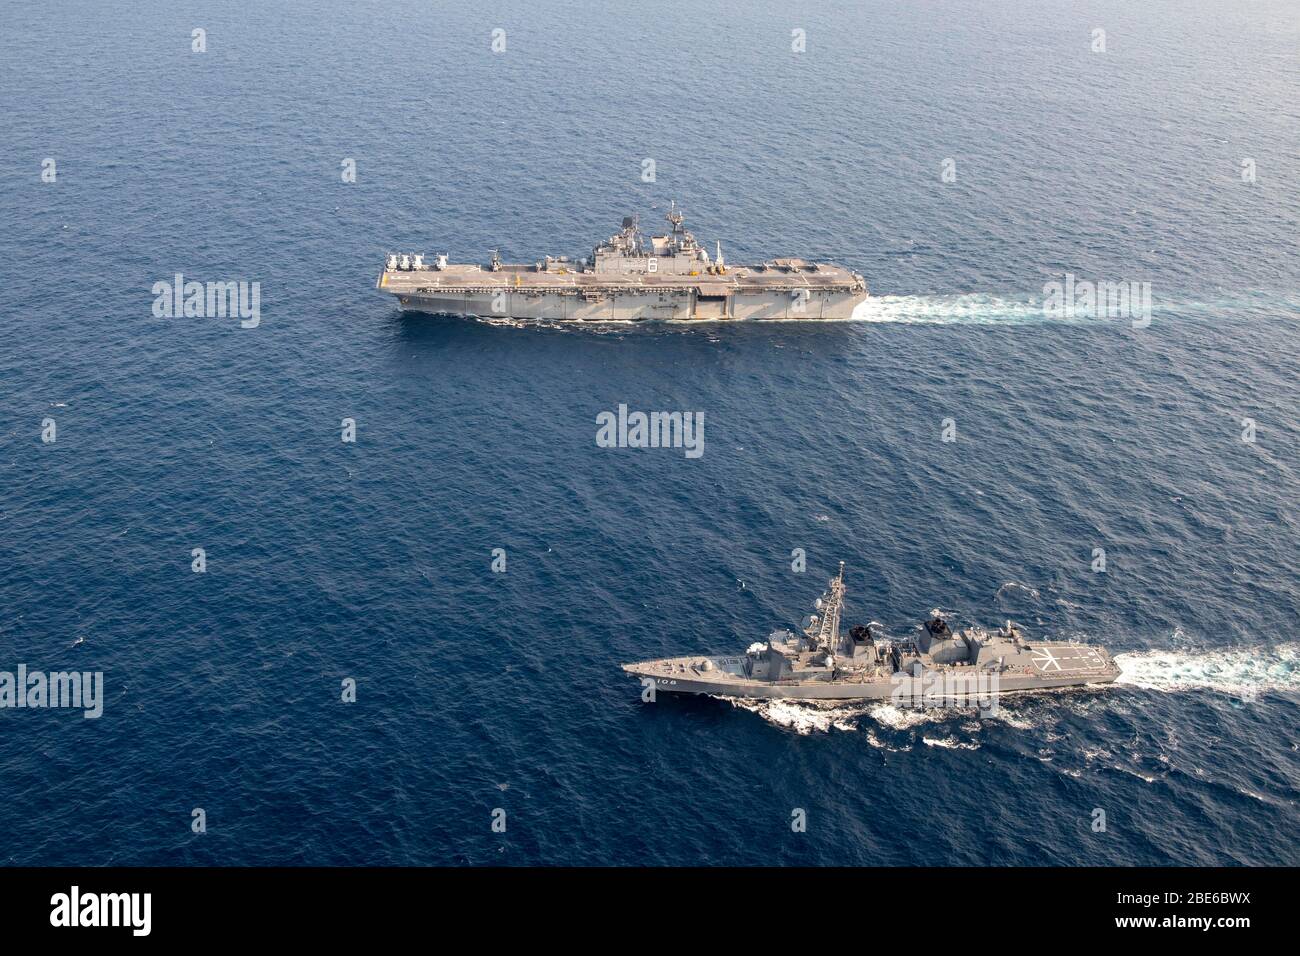 The U.S. Navy flagship America-class amphibious assault ship USS America sails in formation with Japan Maritime Self-Defense Force destroyer JS Akebono, bottom, during routine patrol April 10, 2020 in the East China Sea. Stock Photo